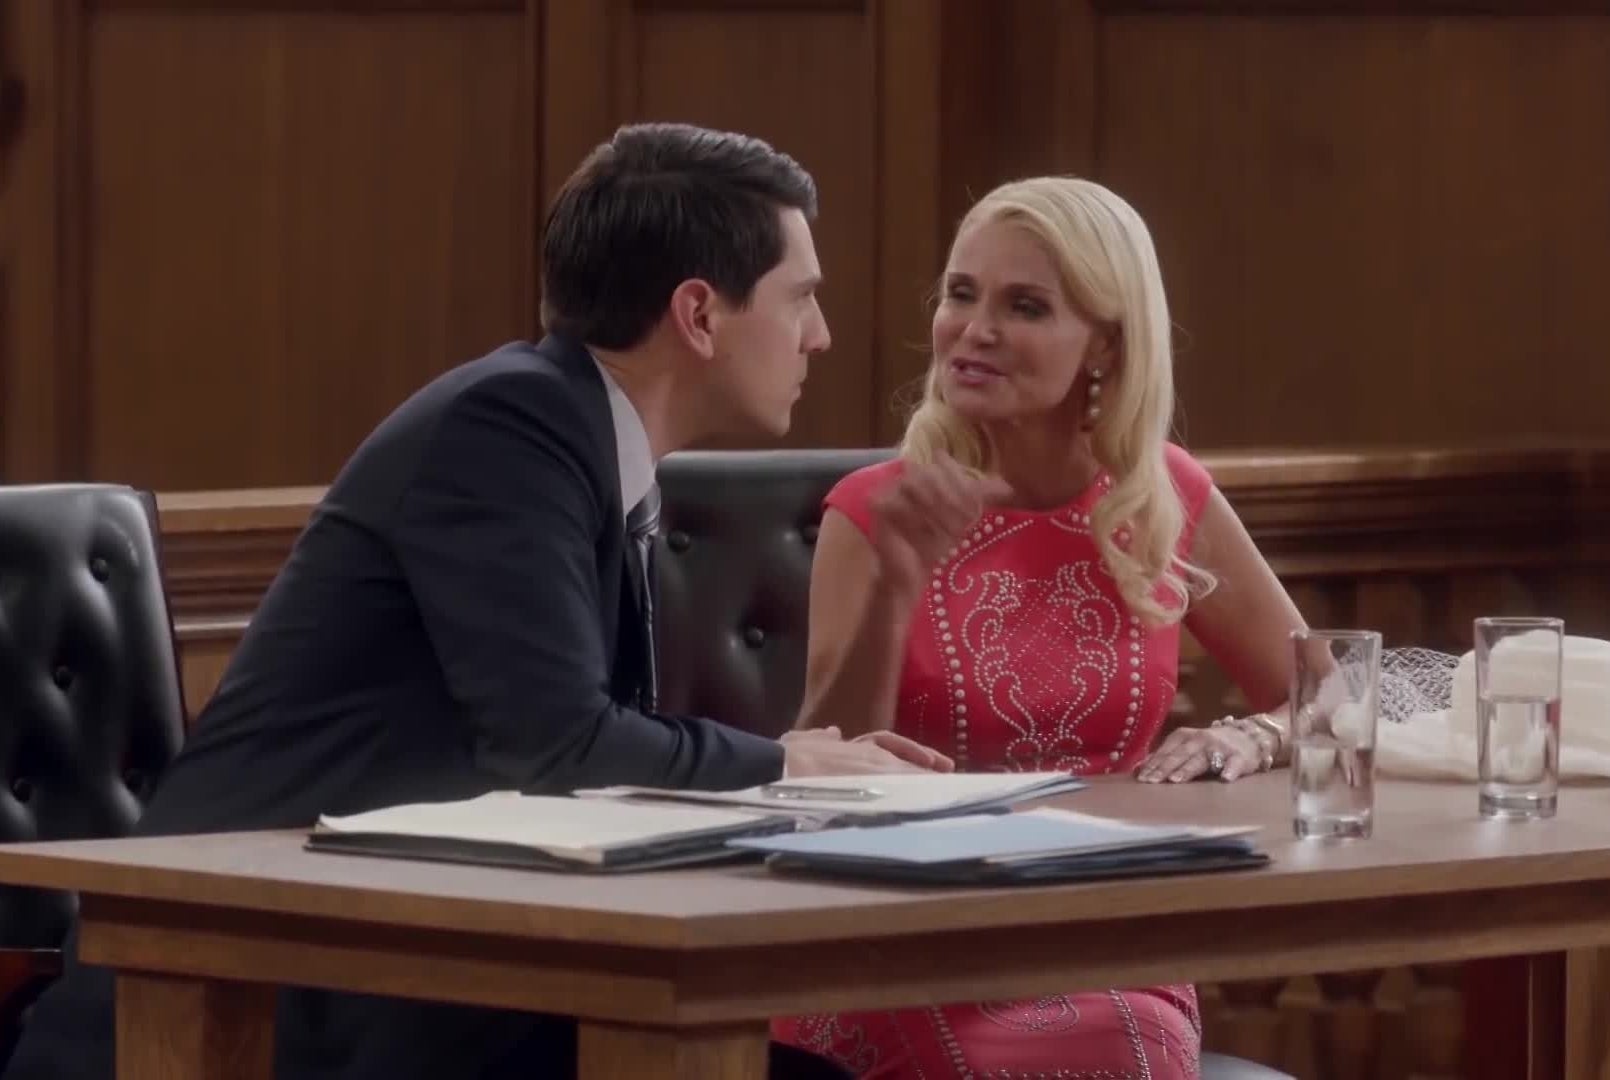 Lavinia and Josh chat during a court scene in &quot;Trial and Error&quot;